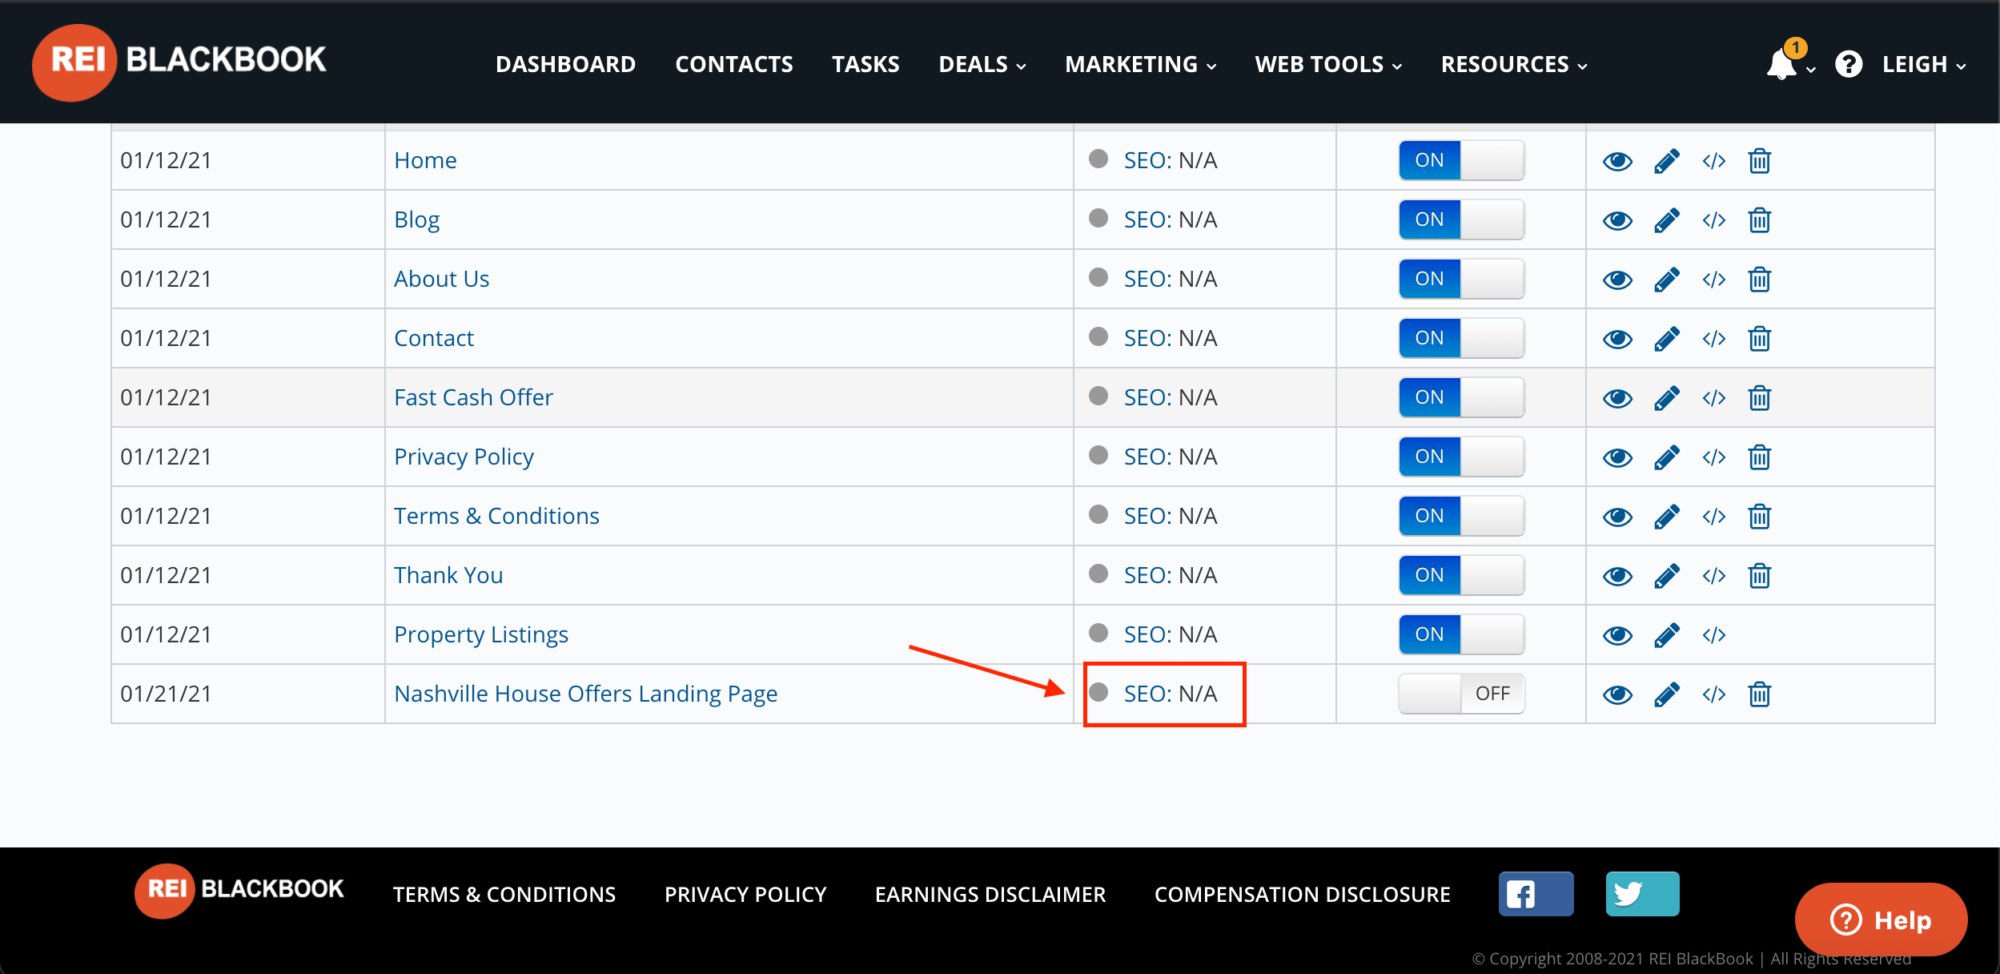 Click "SEO" to customize your landing page URL.